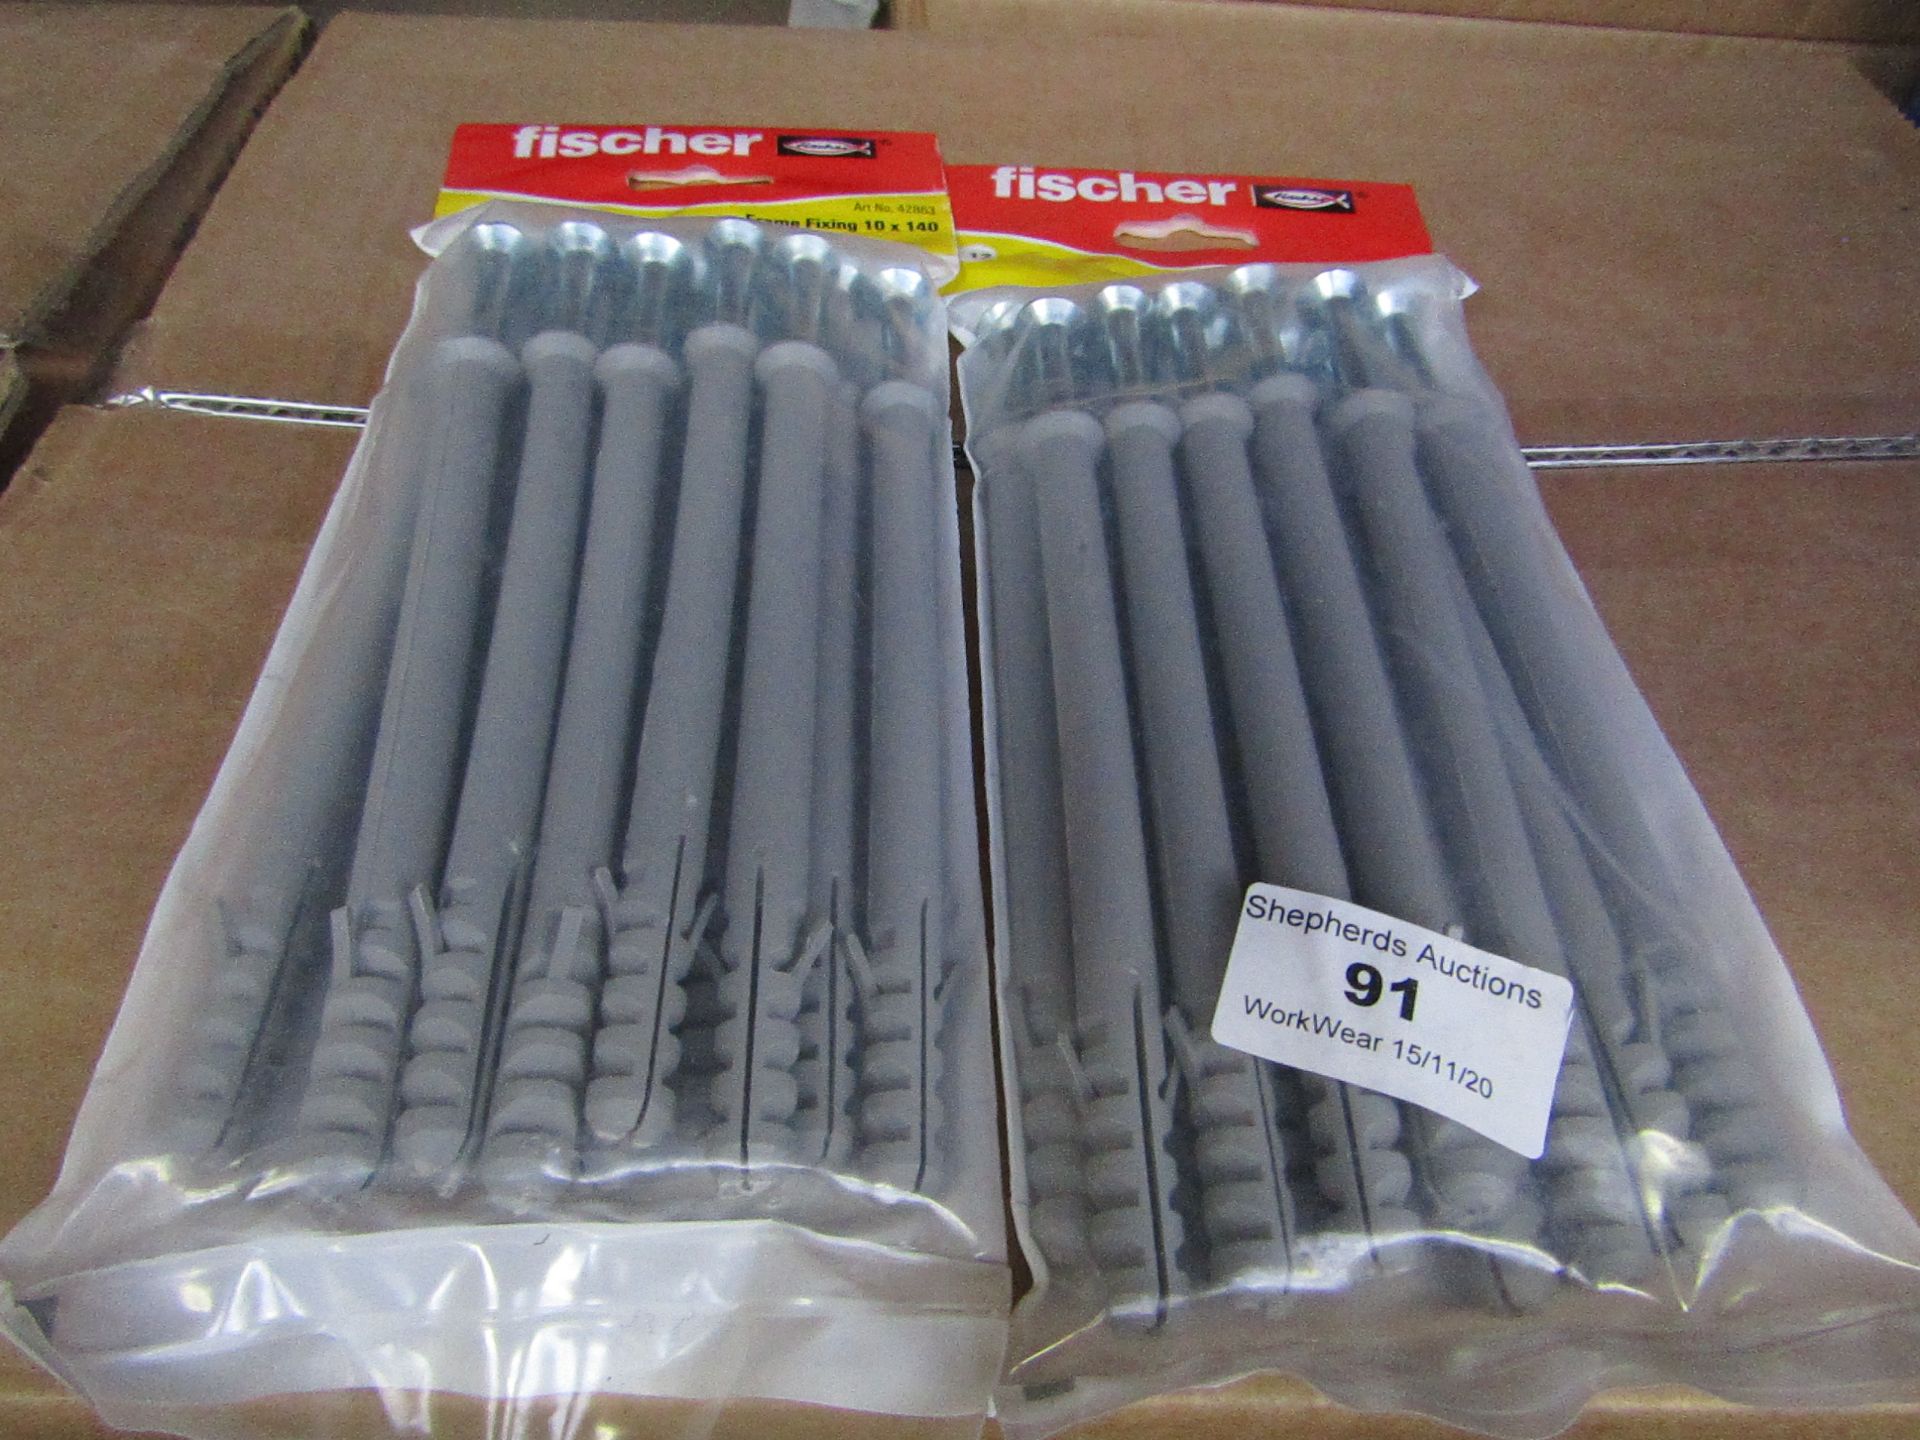 2x Fischer - Frame Fixing 10 x 140 (Packs of 12) - All Unused & Packaged.